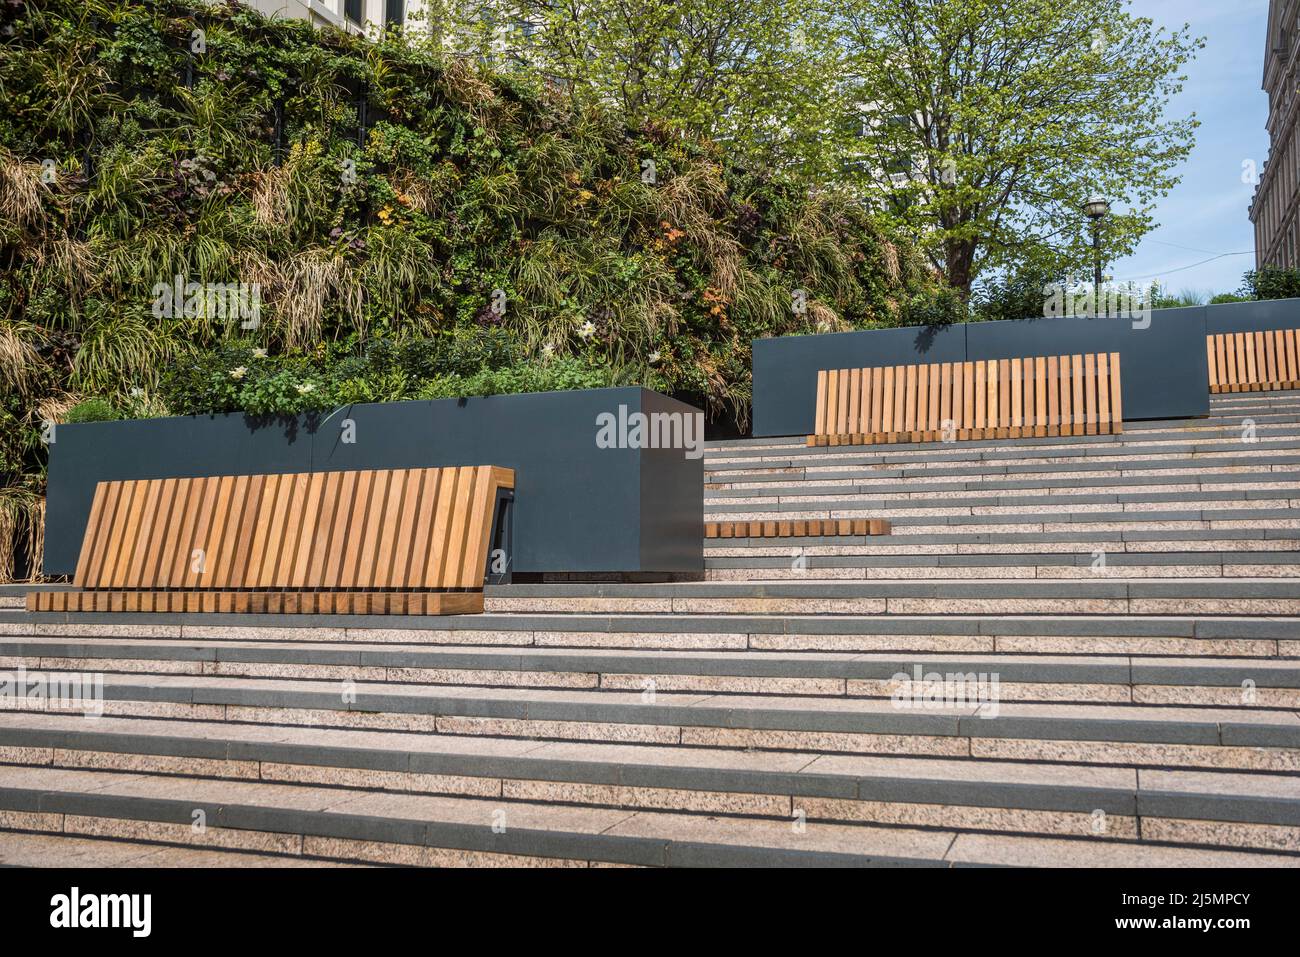 Durable hardwood bench public seating encourage socialising during office lunch breaks. Stock Photo